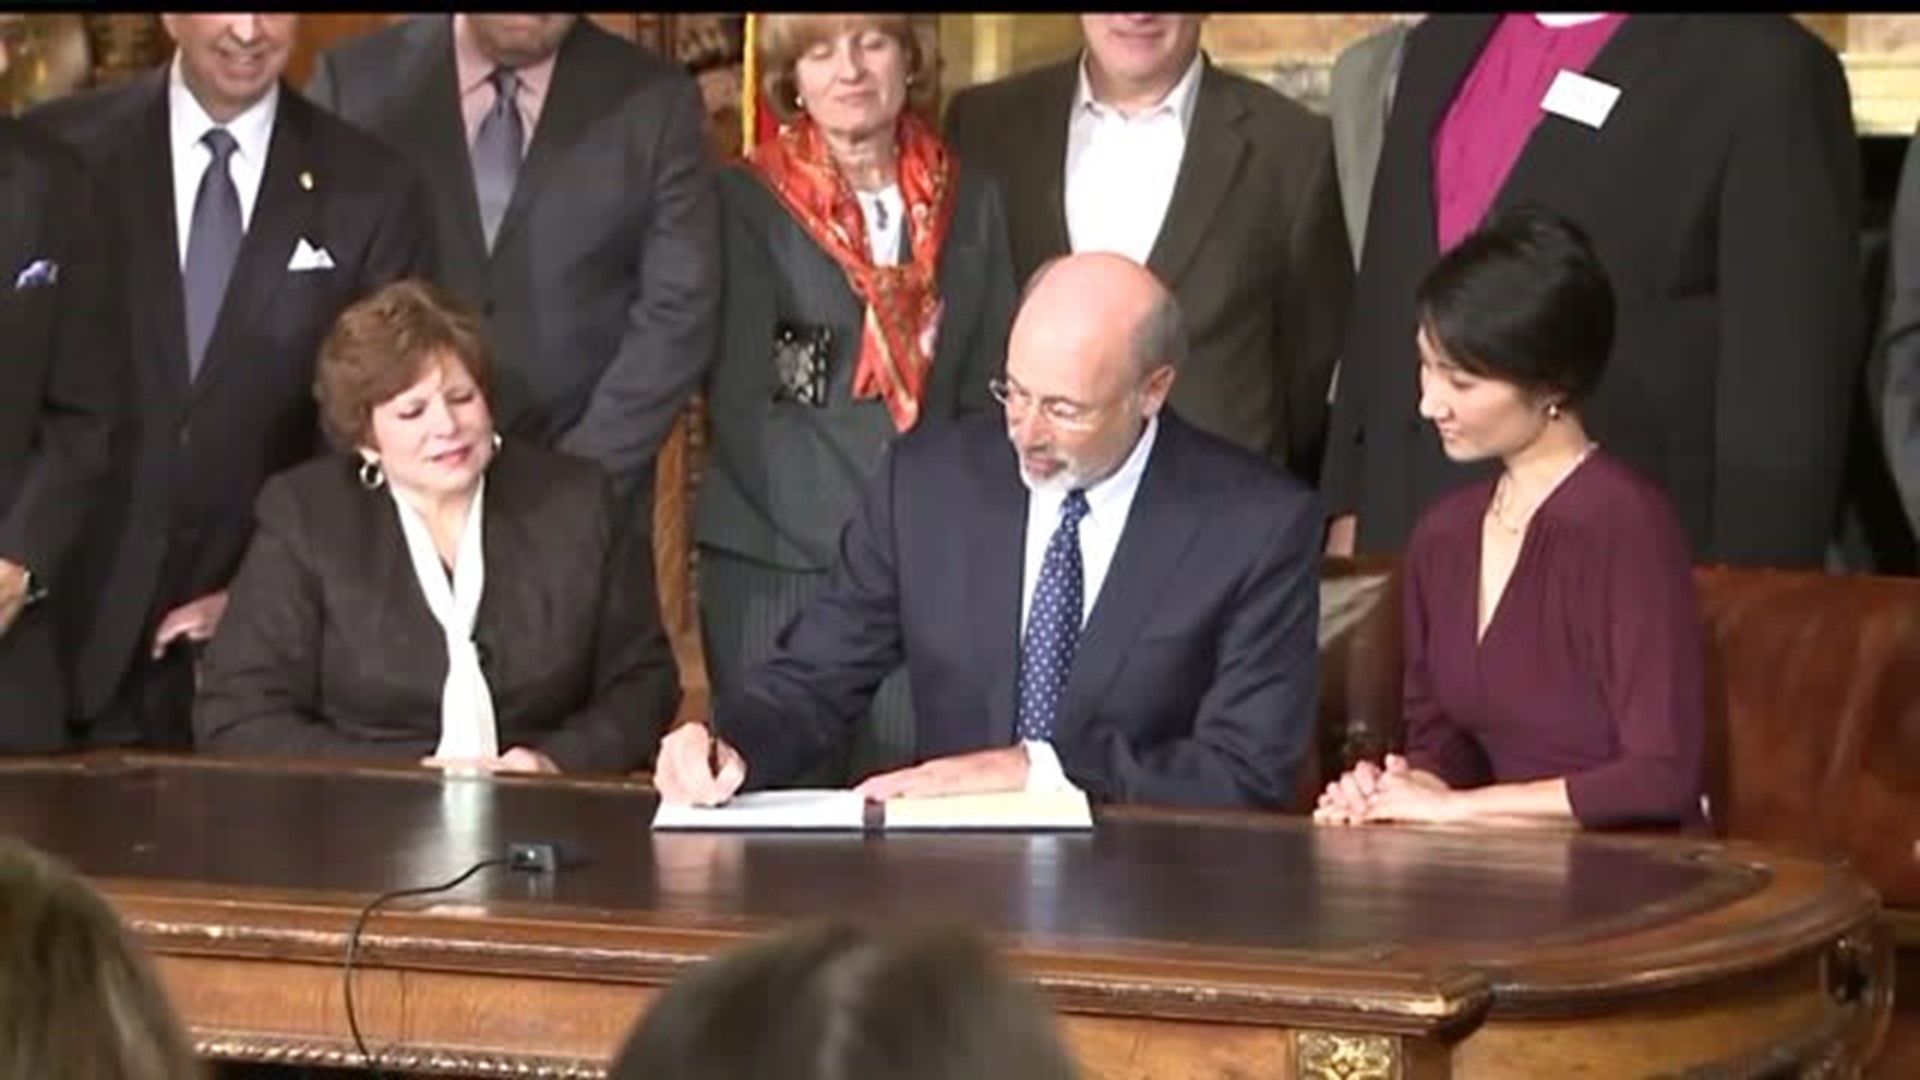 Gov. Wolf signs Executive Order raising minimum wage for state workers, contractors